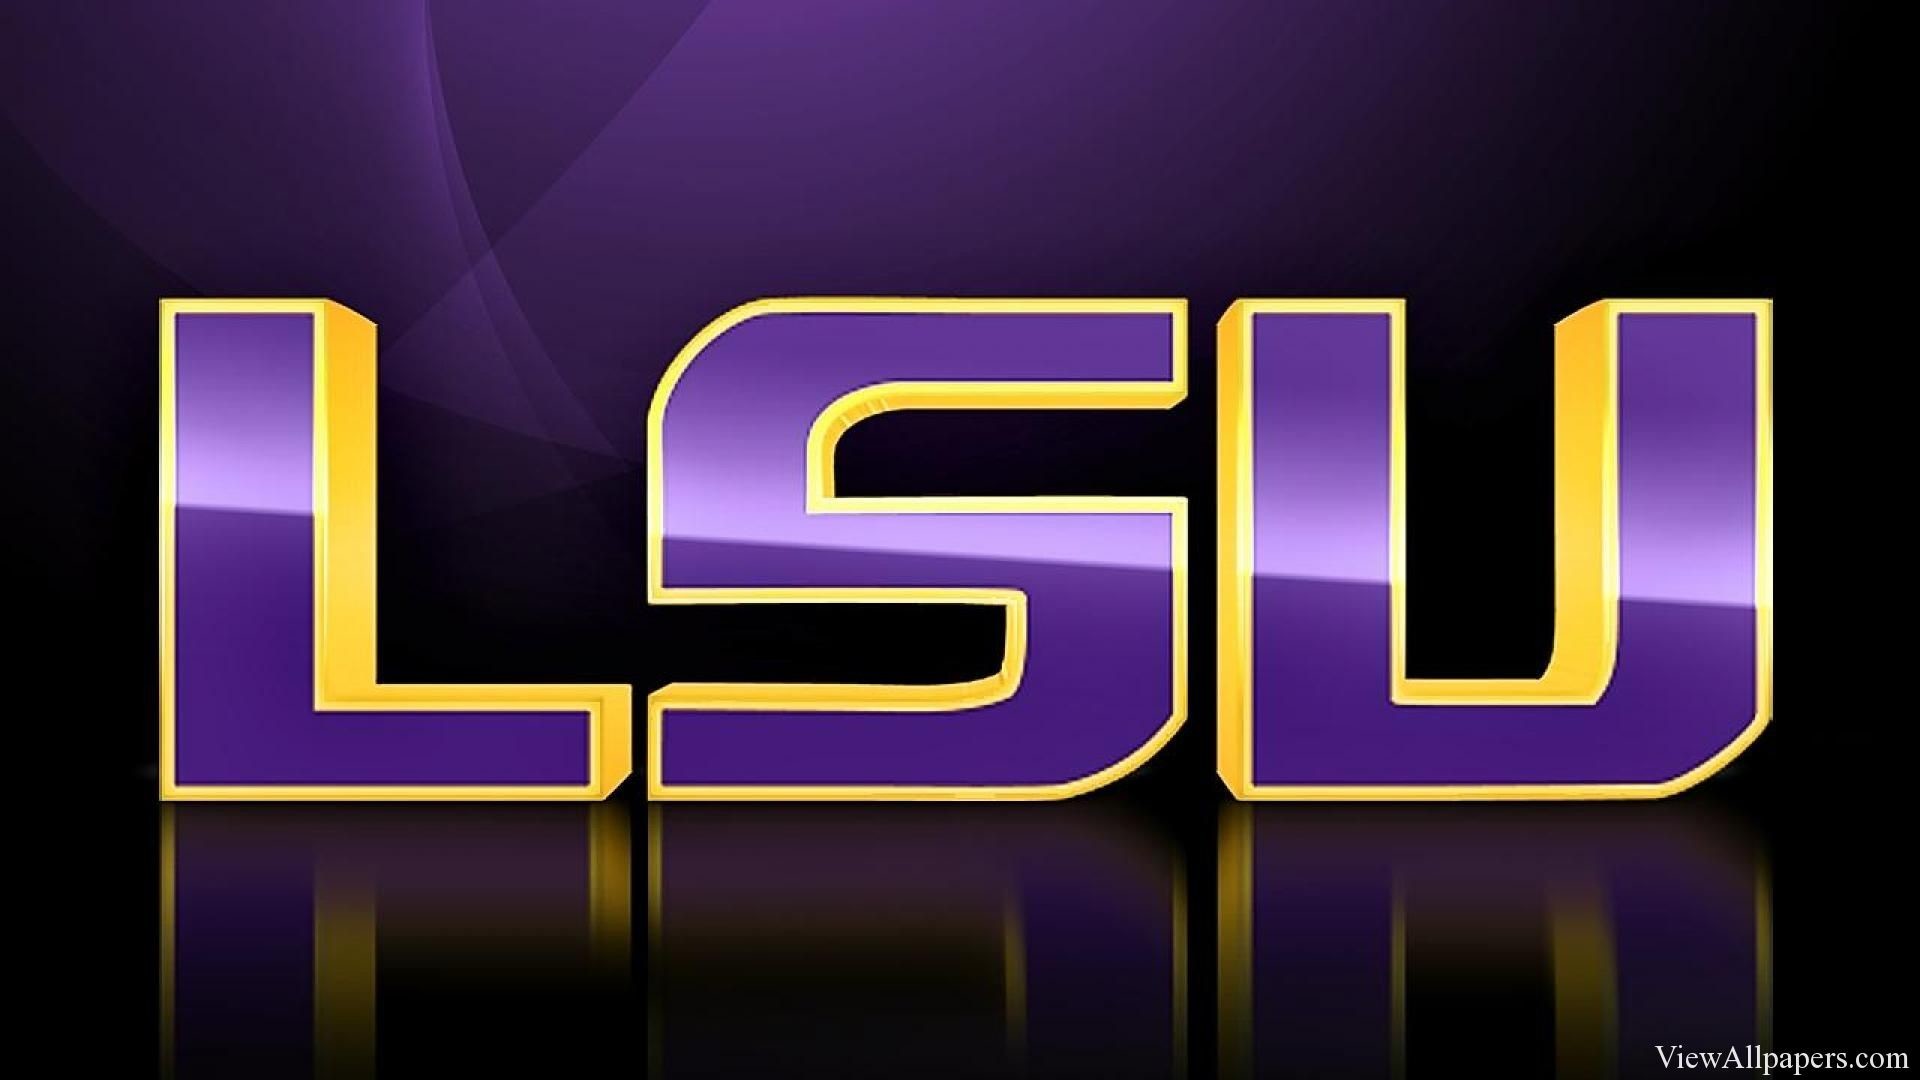 … Download Lsu Football Wallpaper Wallpaper Desktop Background Full  Screen HD . You Can Also Upload And